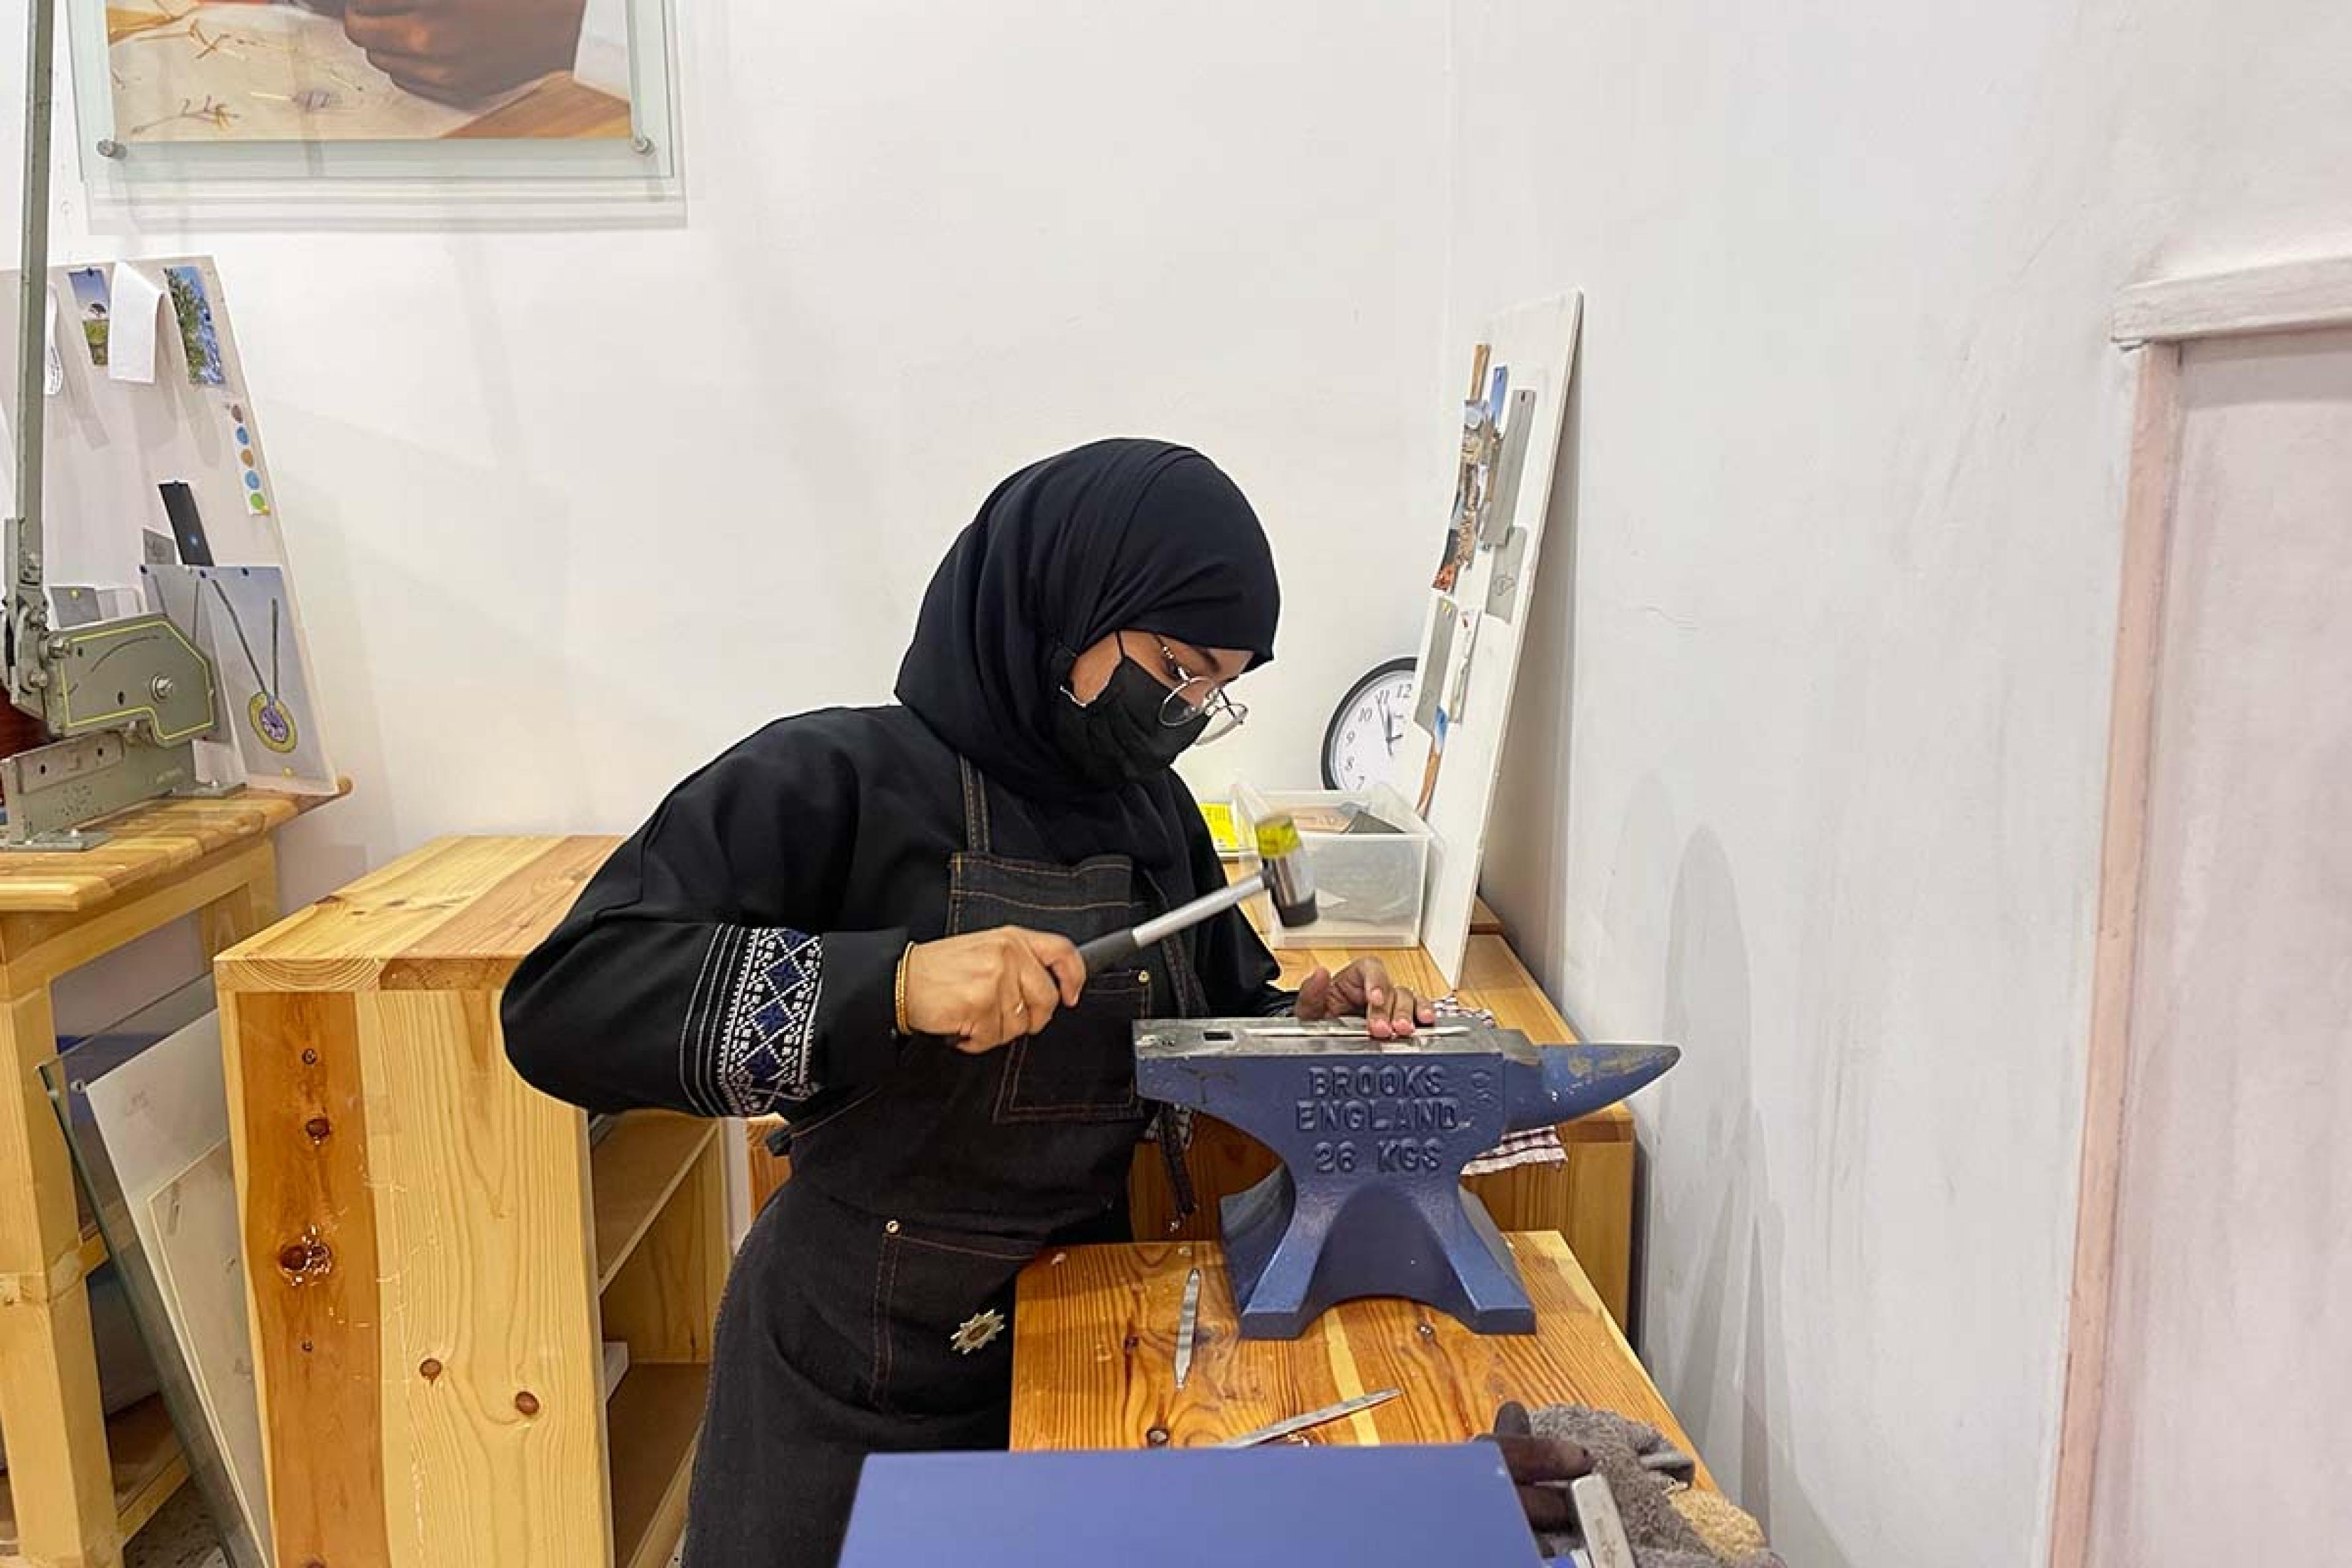 woman in an abaya crafting at a wooden table